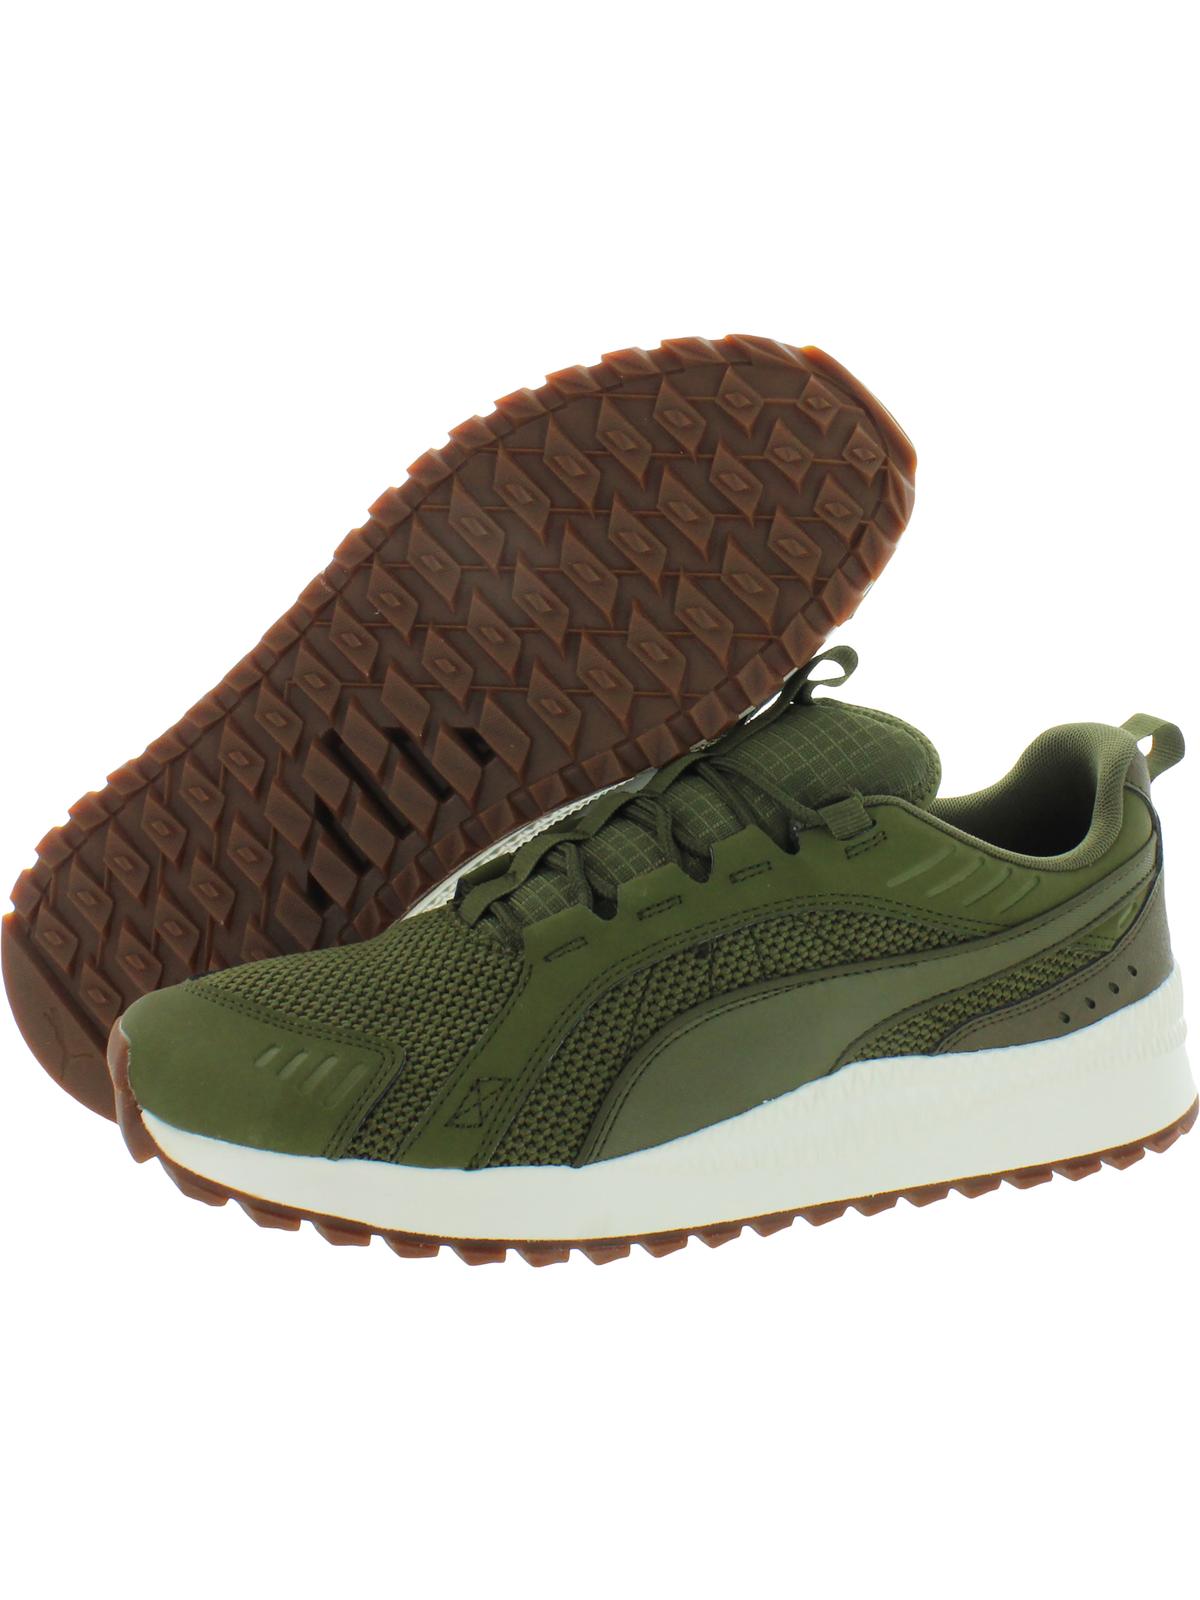 Puma Mens Pacer Next R Fitness Workout Athletic Shoes Green 12 Medium (D) - image 2 of 2